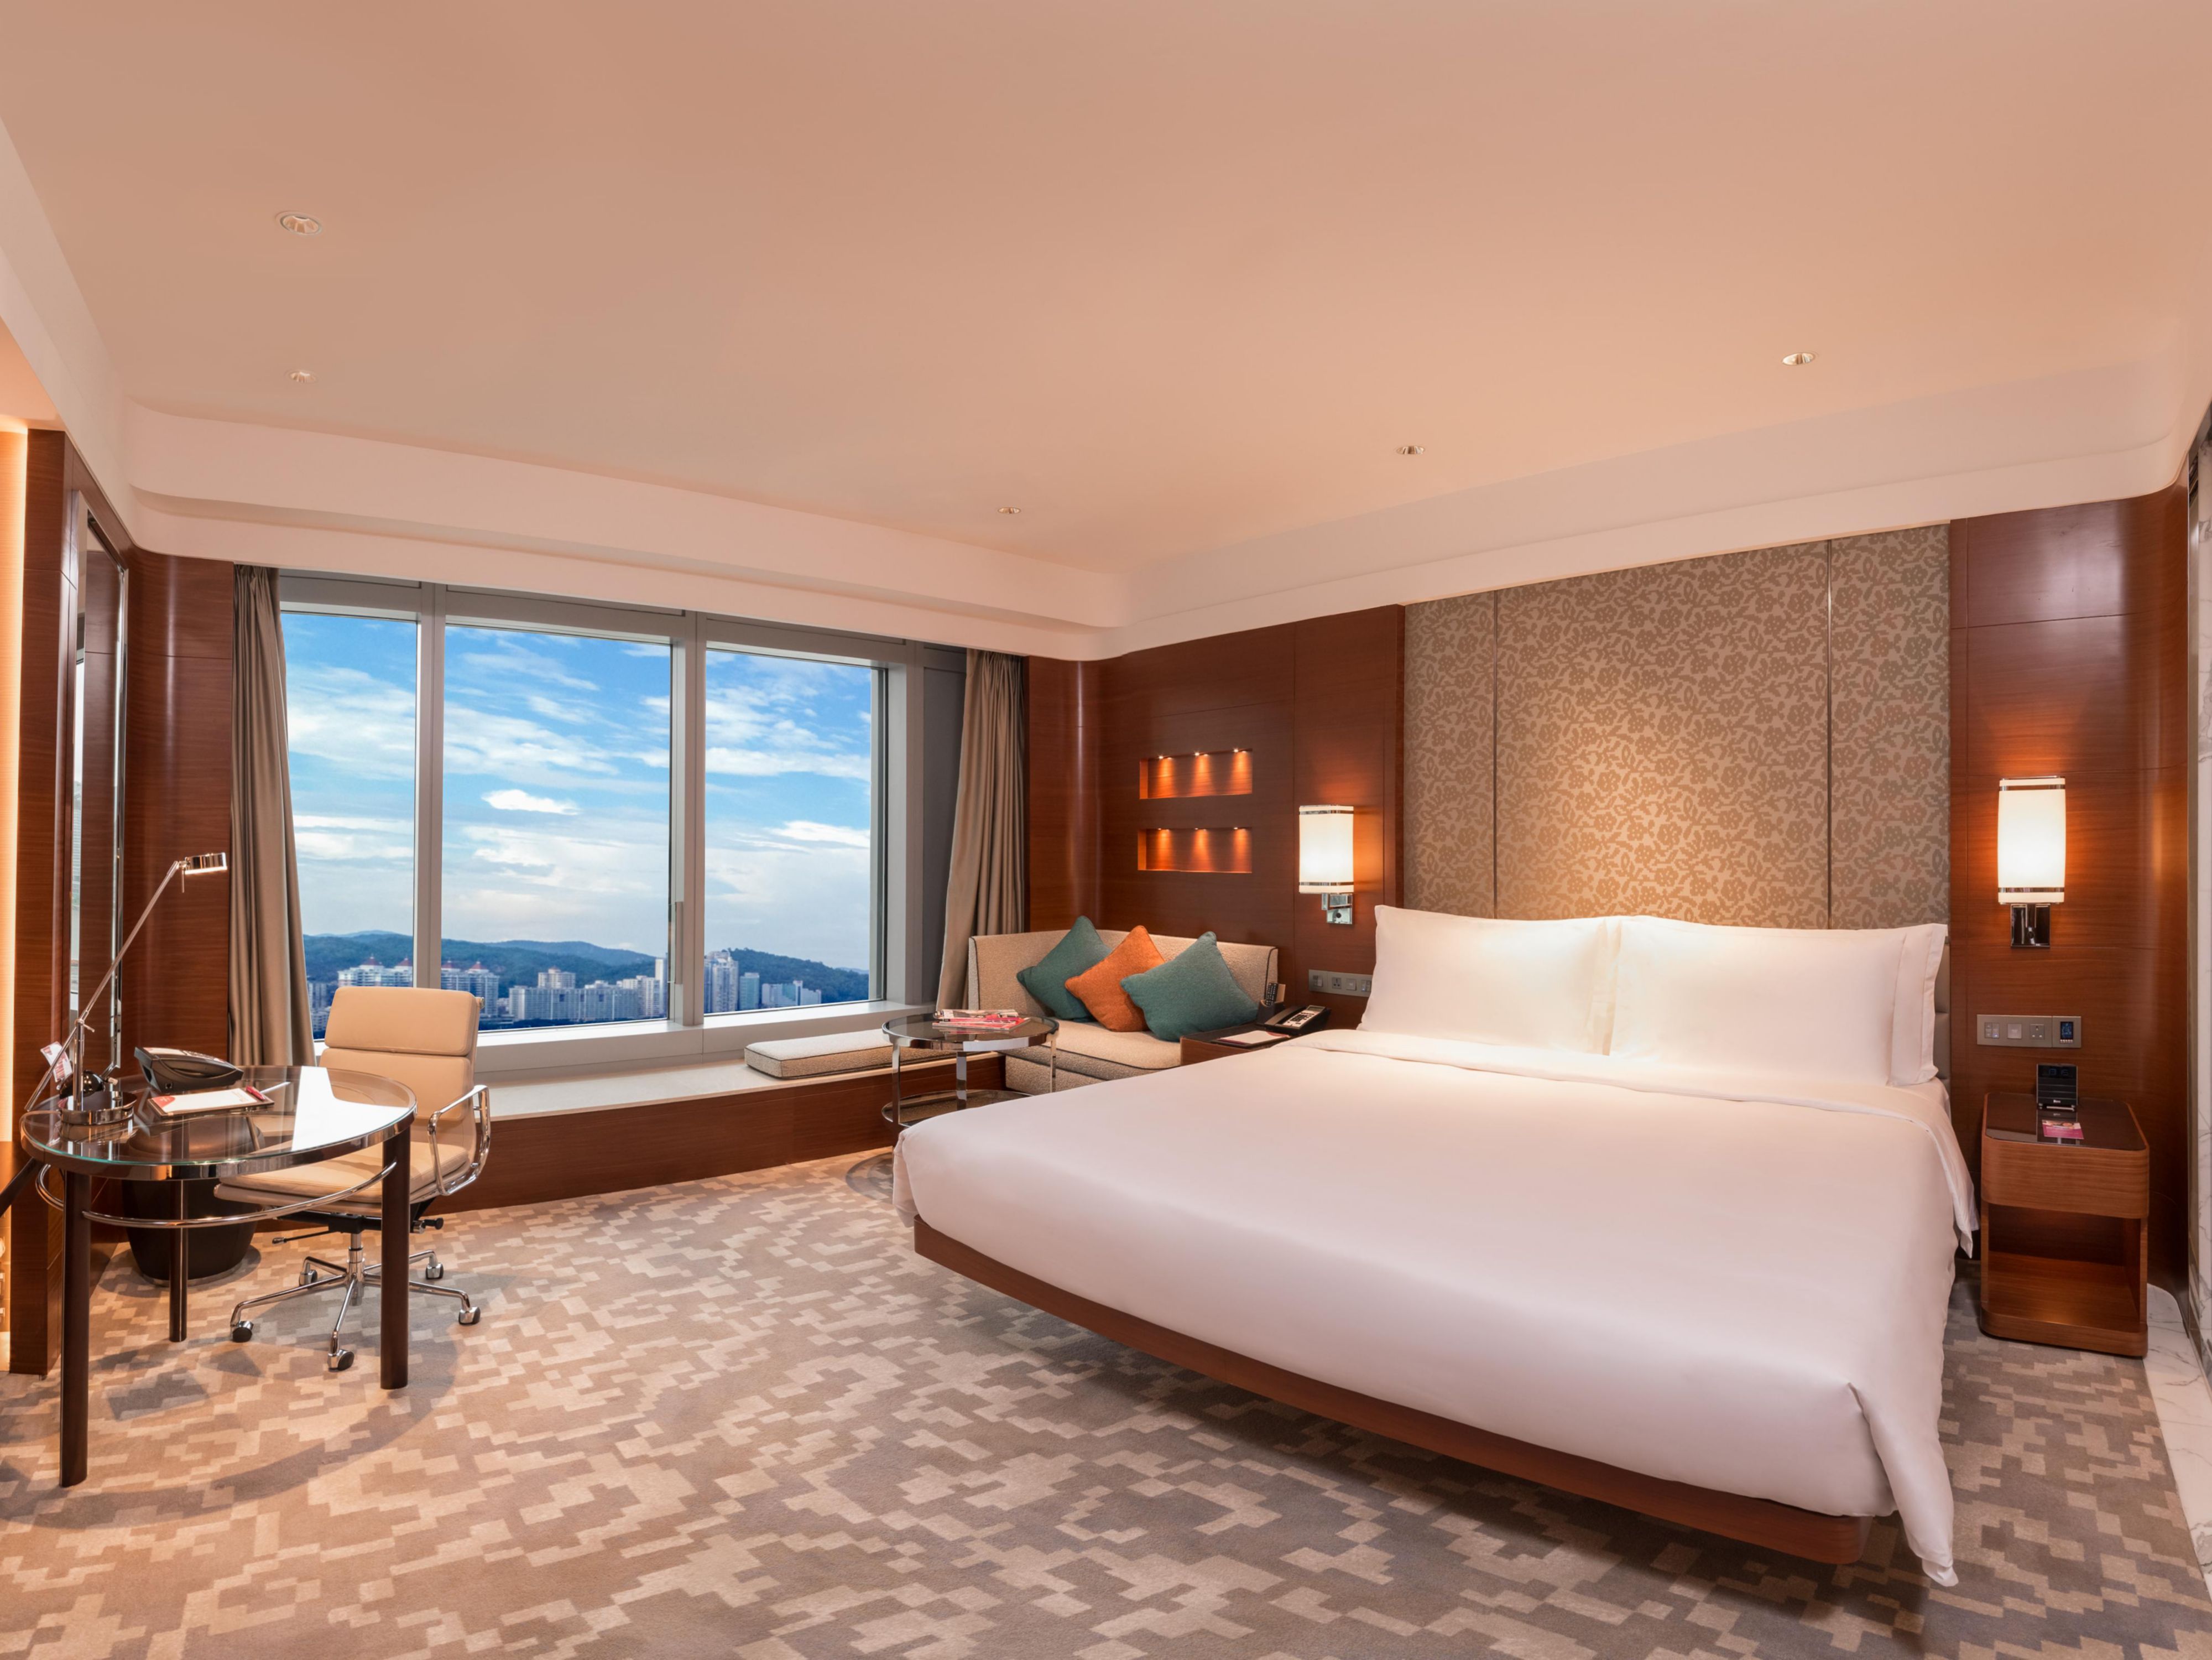 [Long Stay Exclusive Offer] ▪ Stay for a minimum of 14 consecutive nights or above with long staying package of benefits. 20% off all day dining and Laundry. If you are interested, please contact us immediately. 
CALL +853 2888 6888